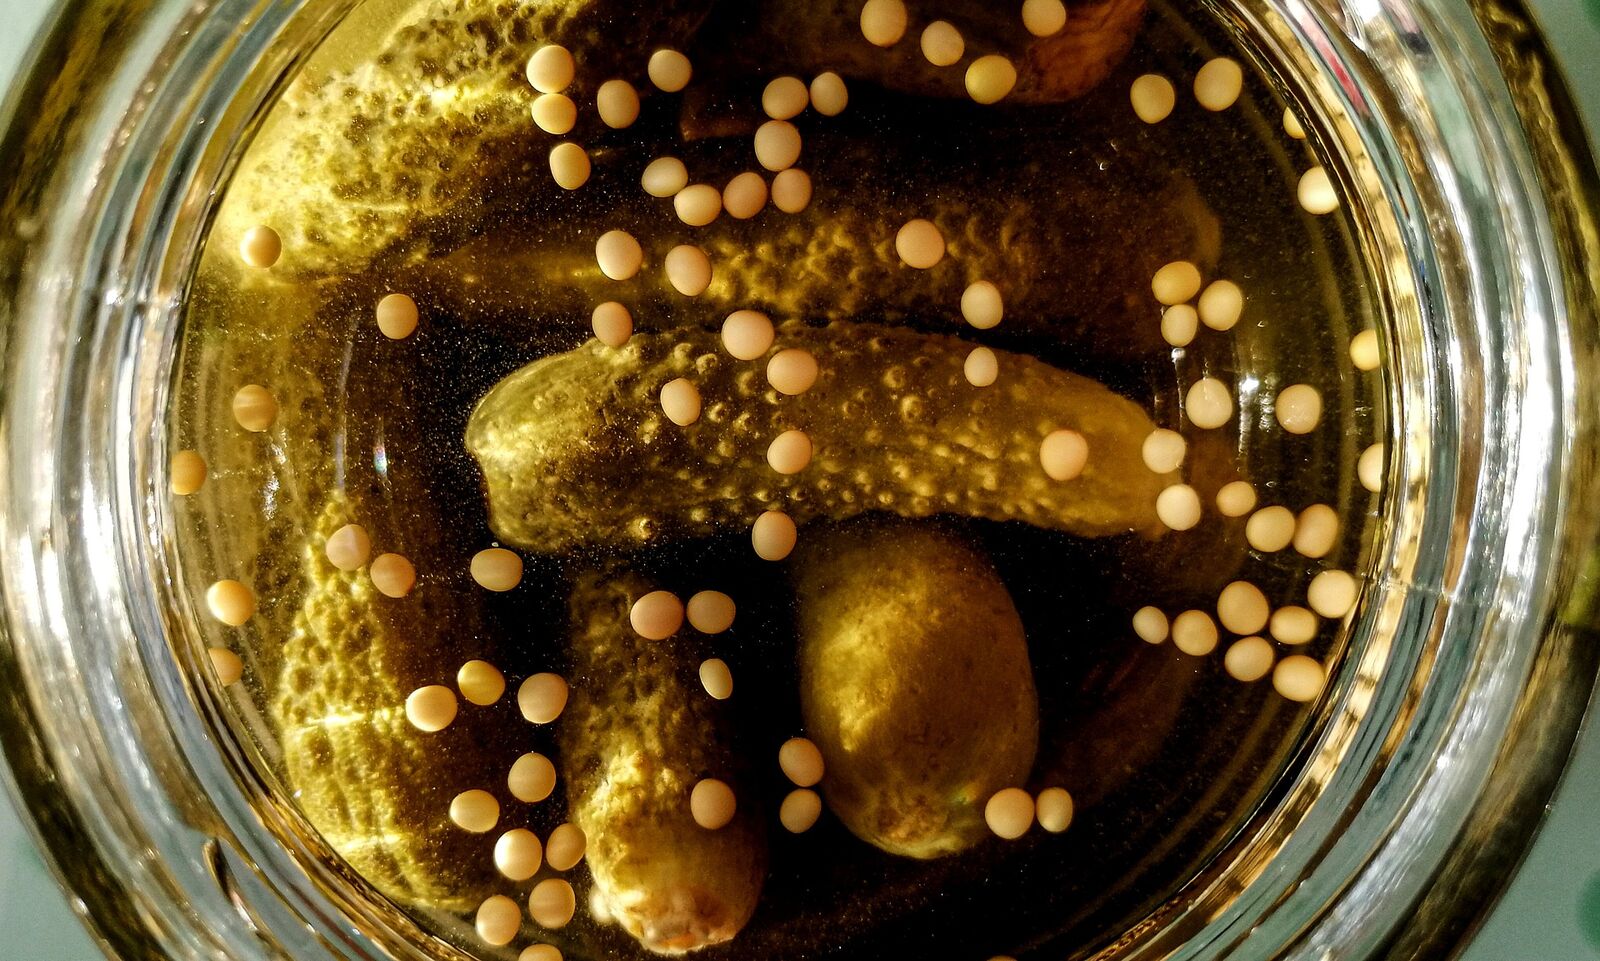 Pickle your own mustard gherkins